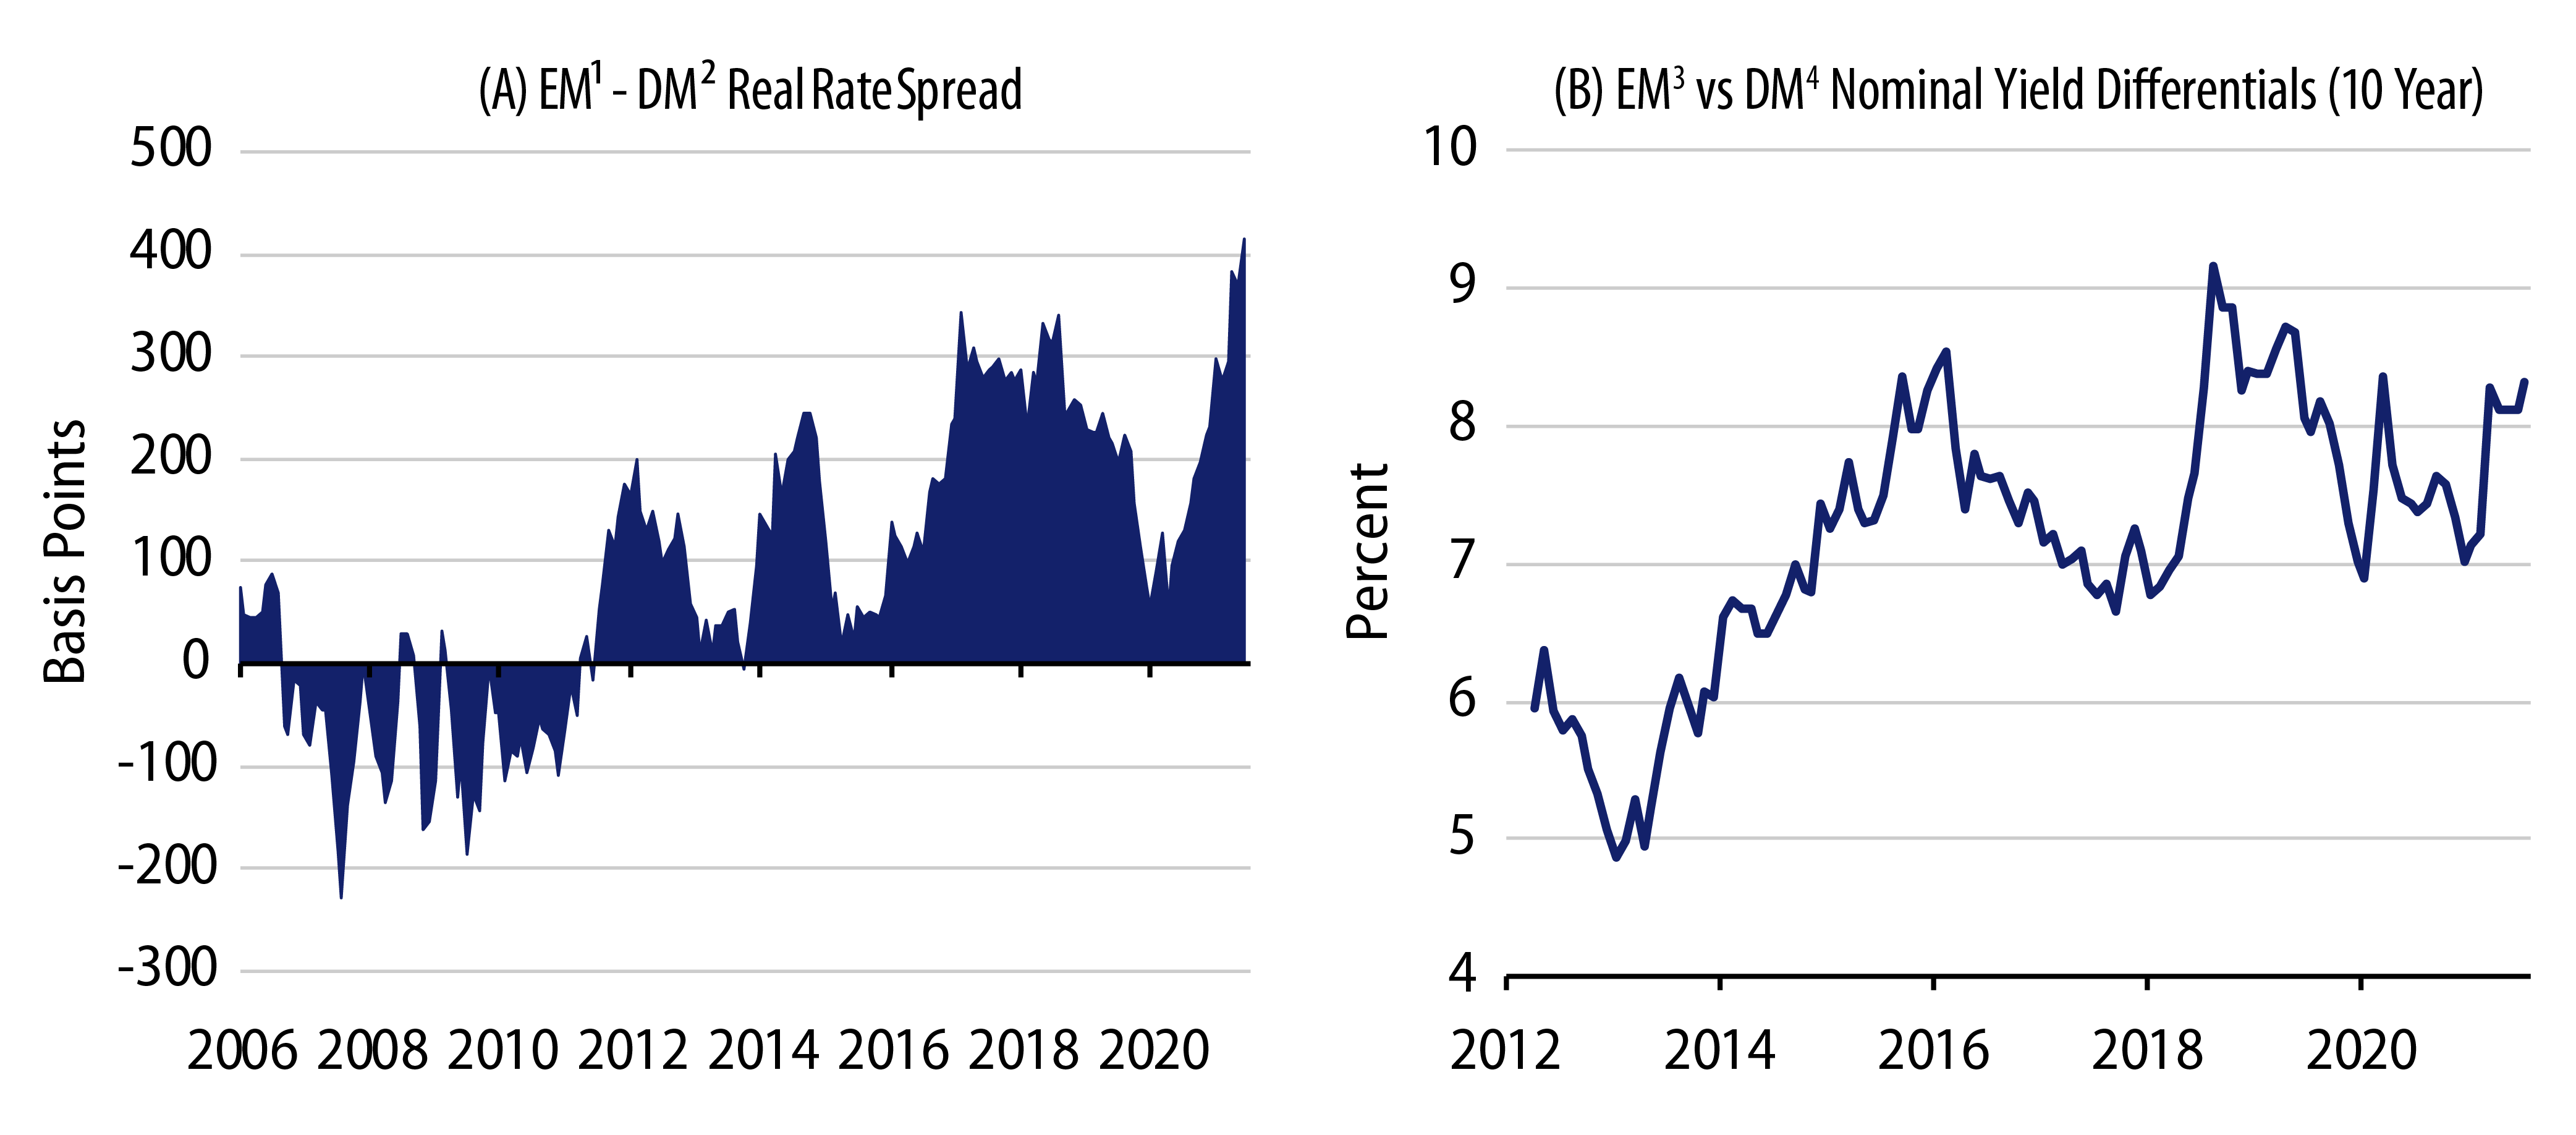 Explore EM vs DM Real Rate Spread and Nominal Yield Diﬀerentials (10 Year)